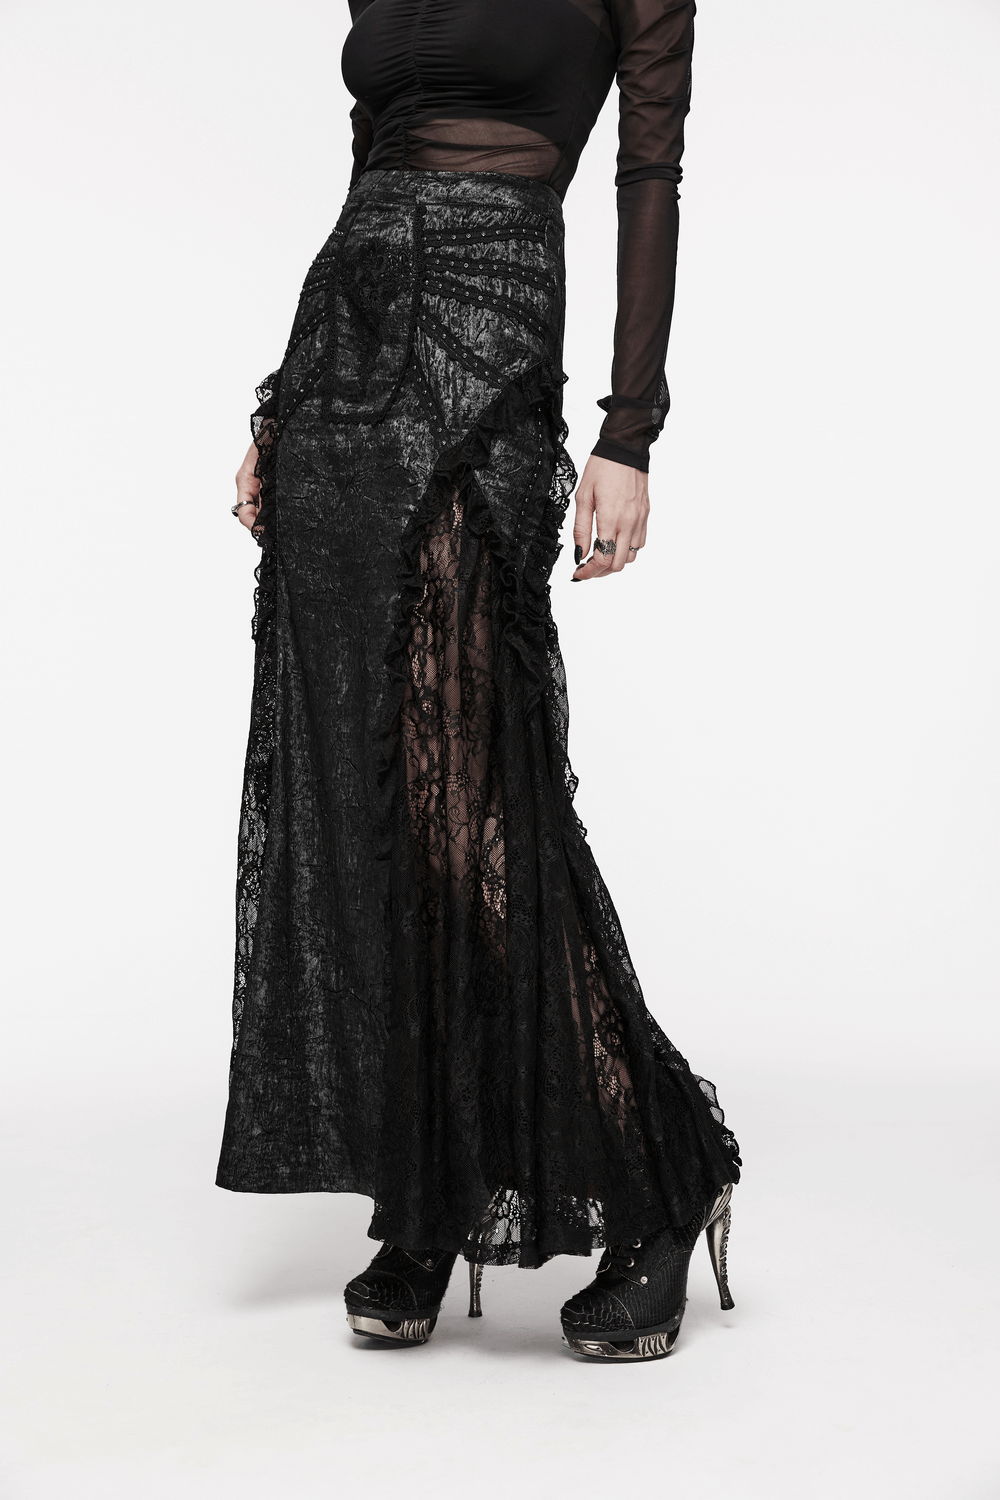 Gothic Textured Lace Ruffled Maxi Skirt for Women